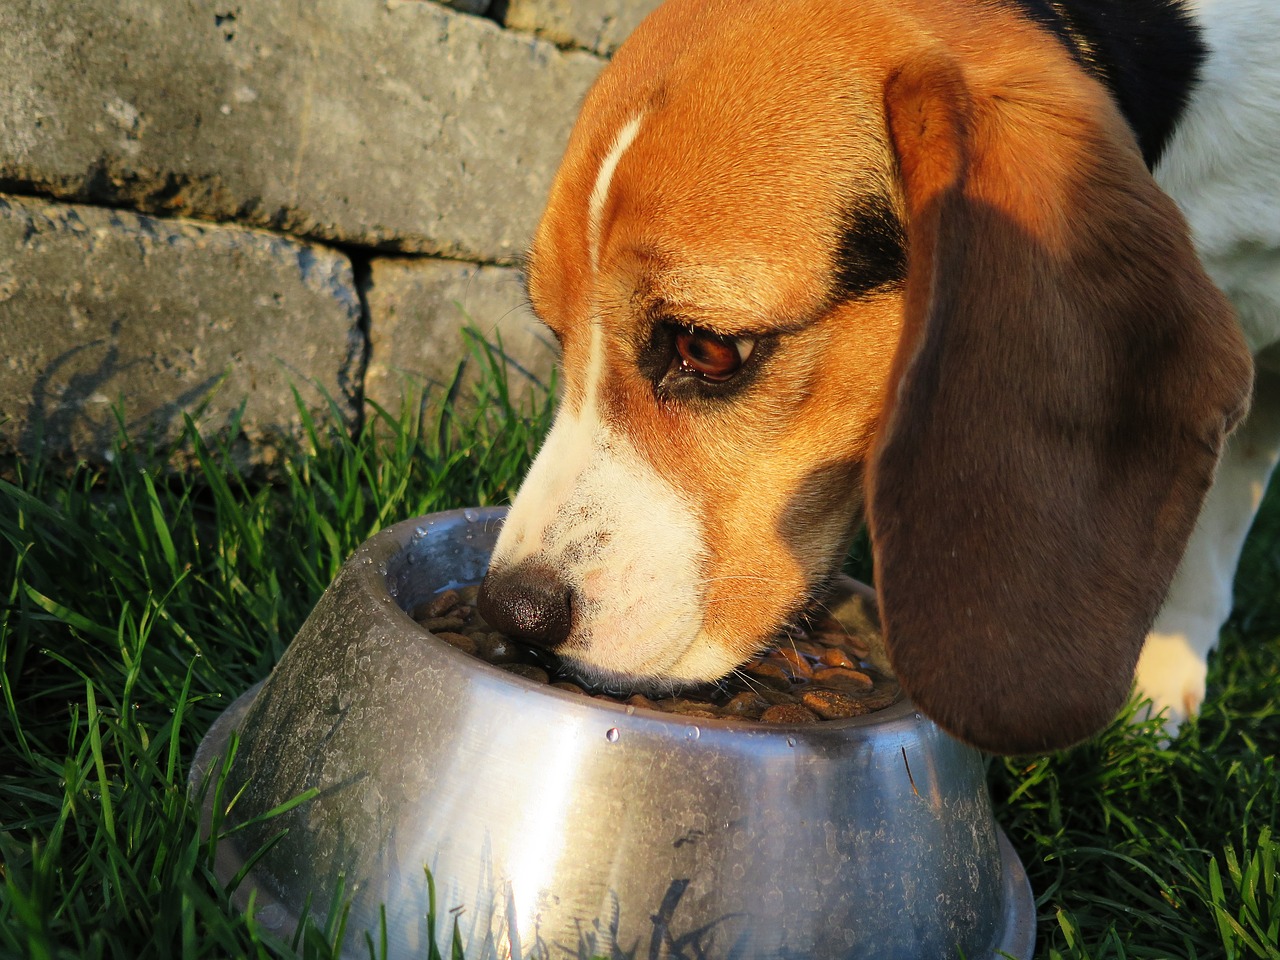 dog food in bowl